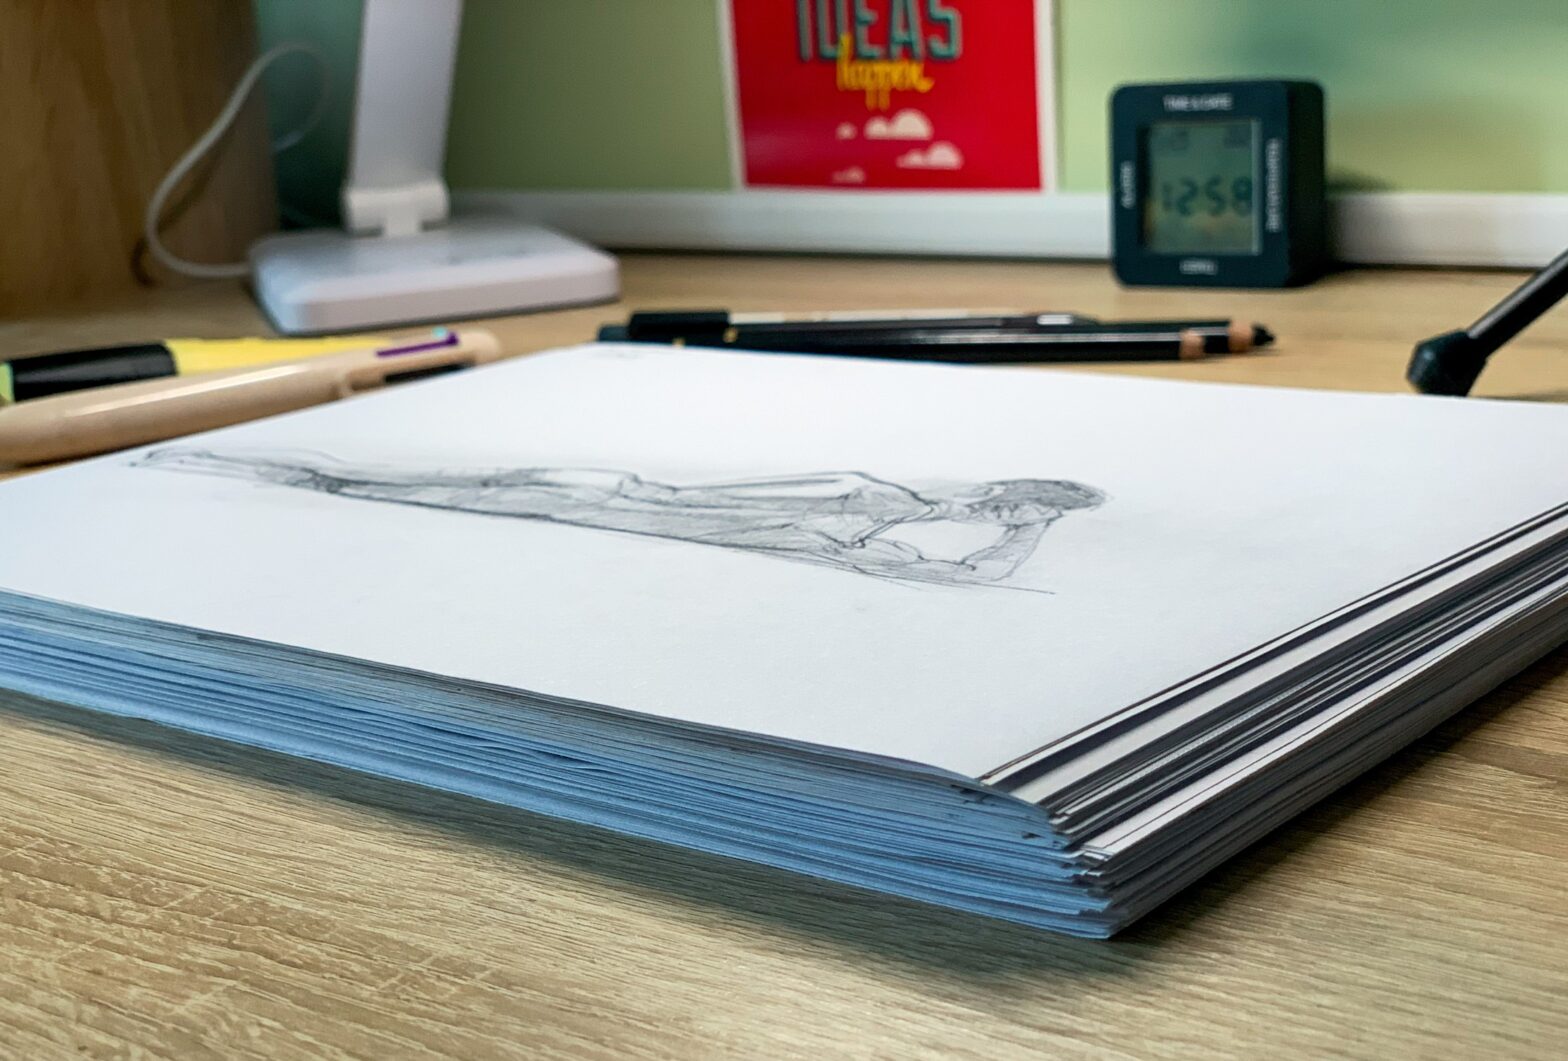 400 sketches in 20 days: WHAT I LEARNED FROM THIS CHALLENGE